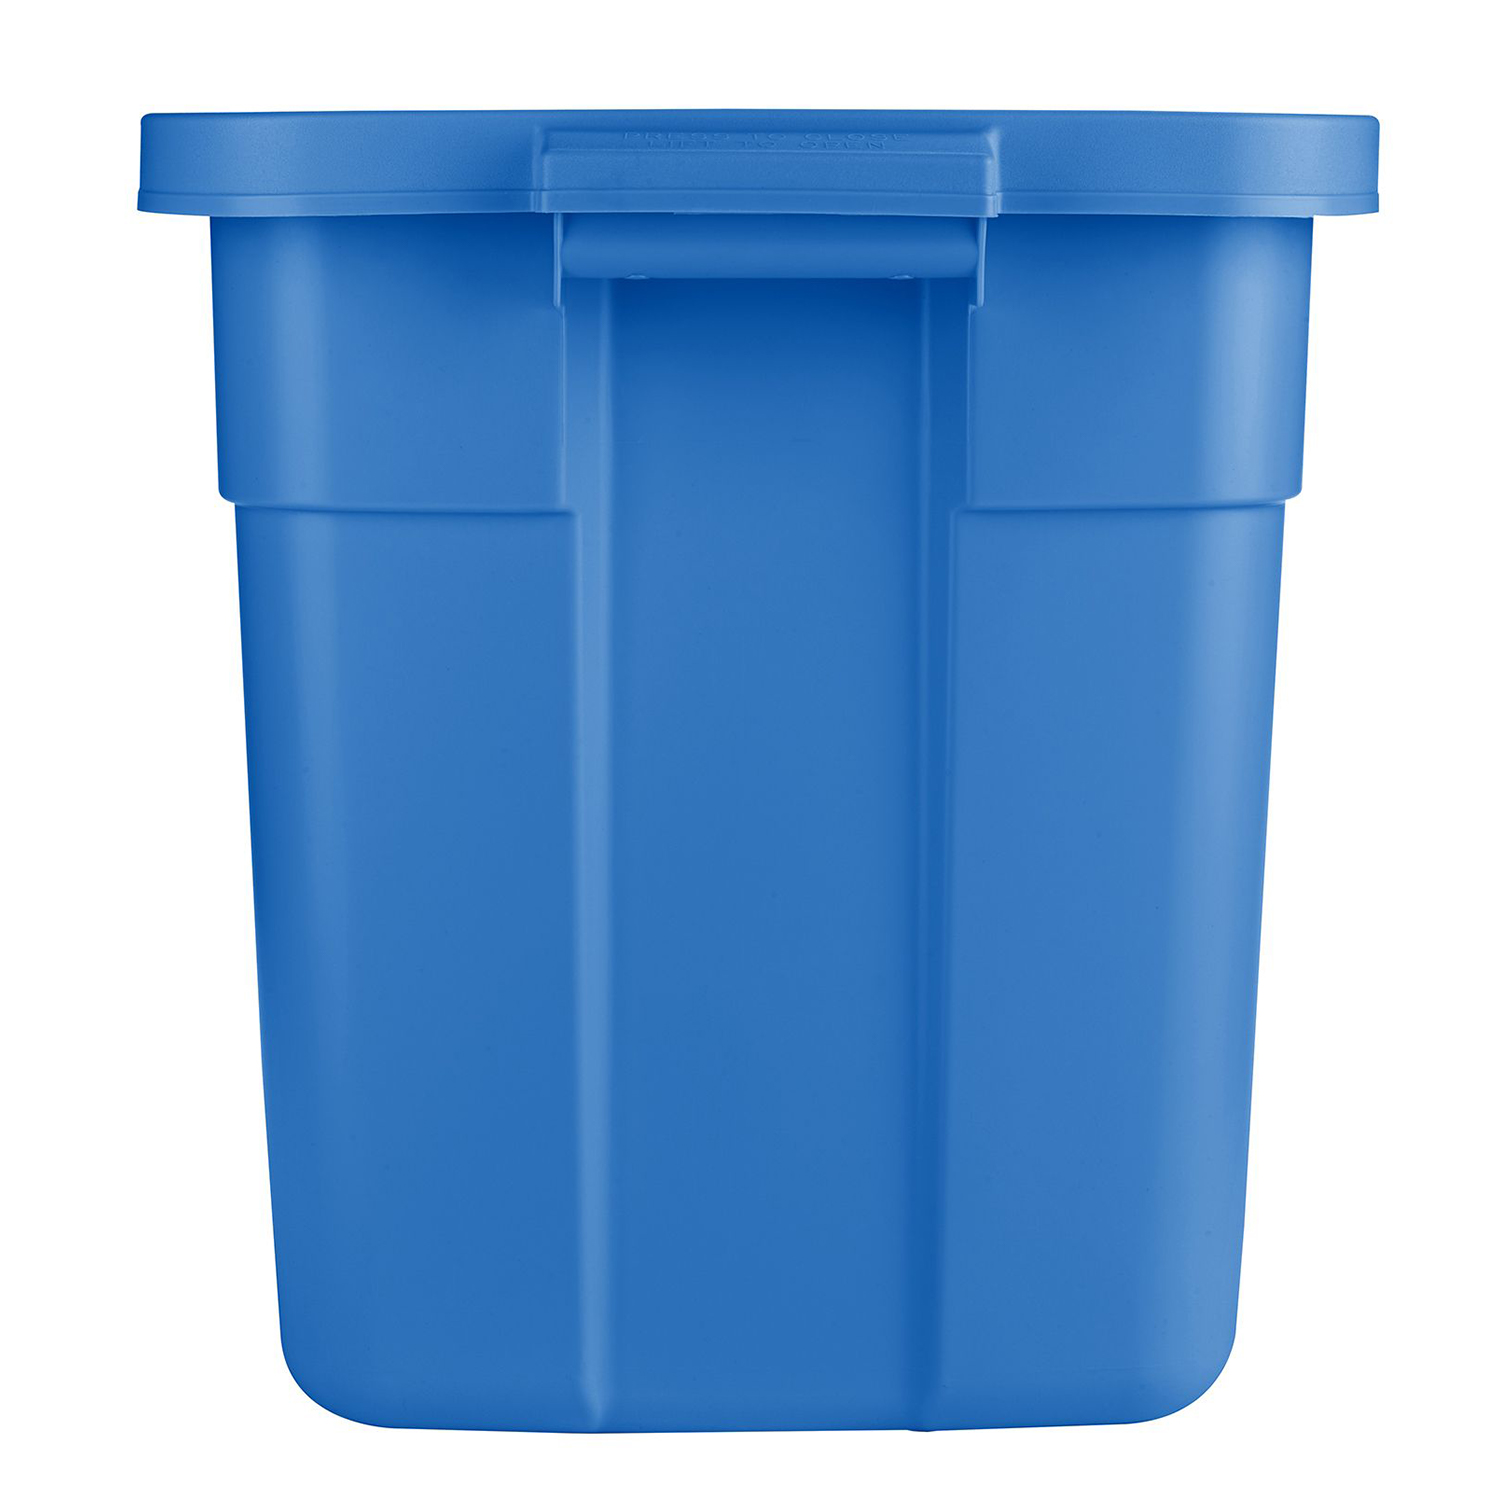 Rubbermaid Roughneck Tote 18 Gal Storage Container, Heritage Blue (6 Pack) - image 5 of 5